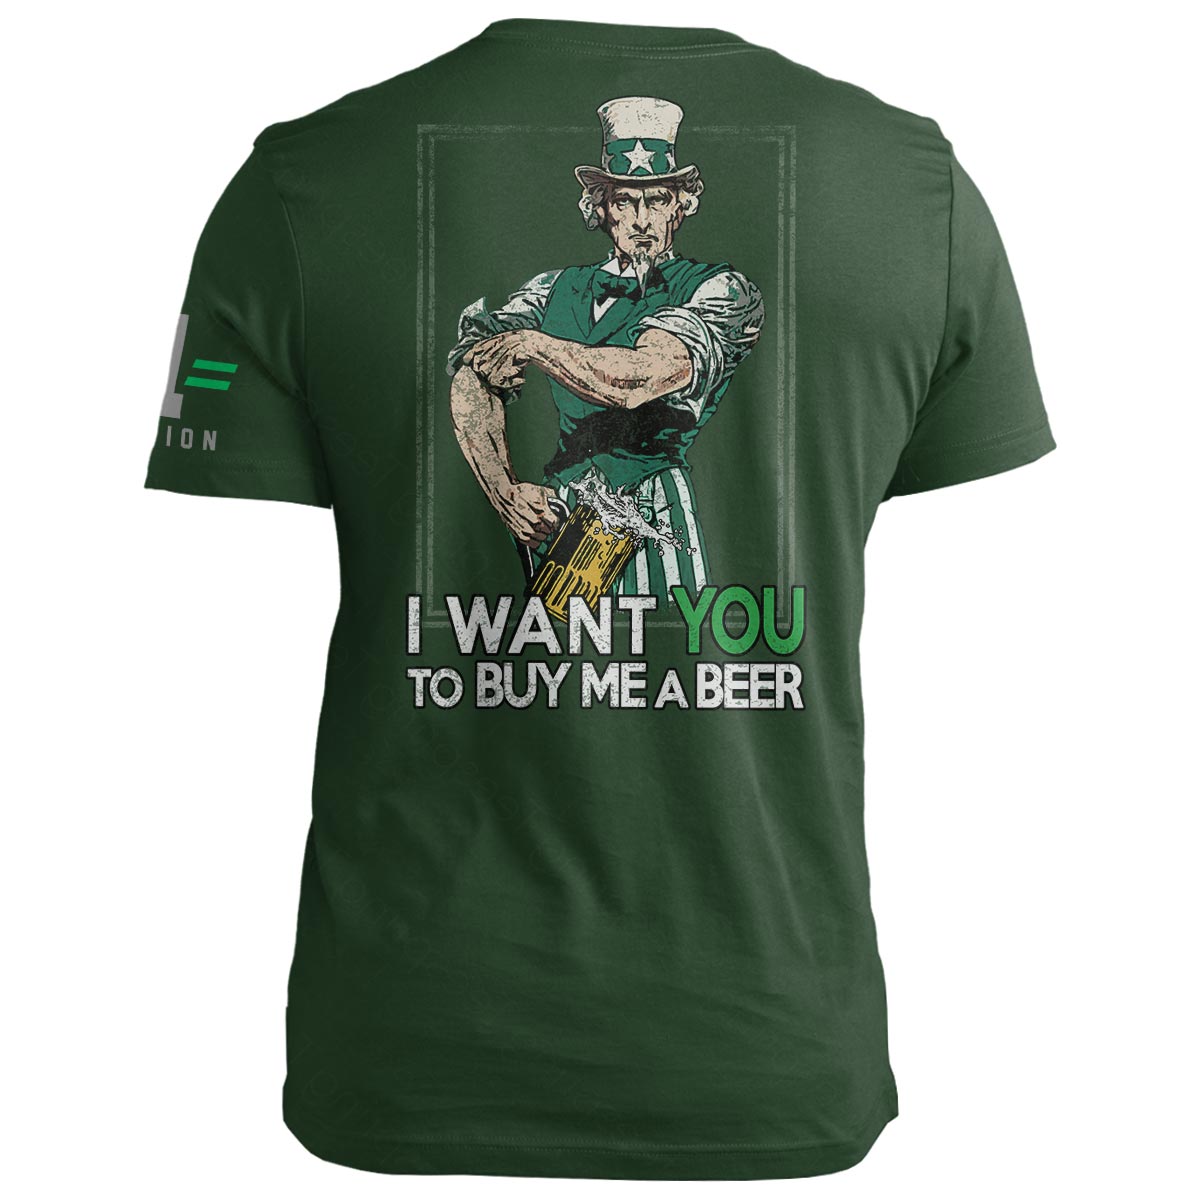 I want YOU to buy me a beer